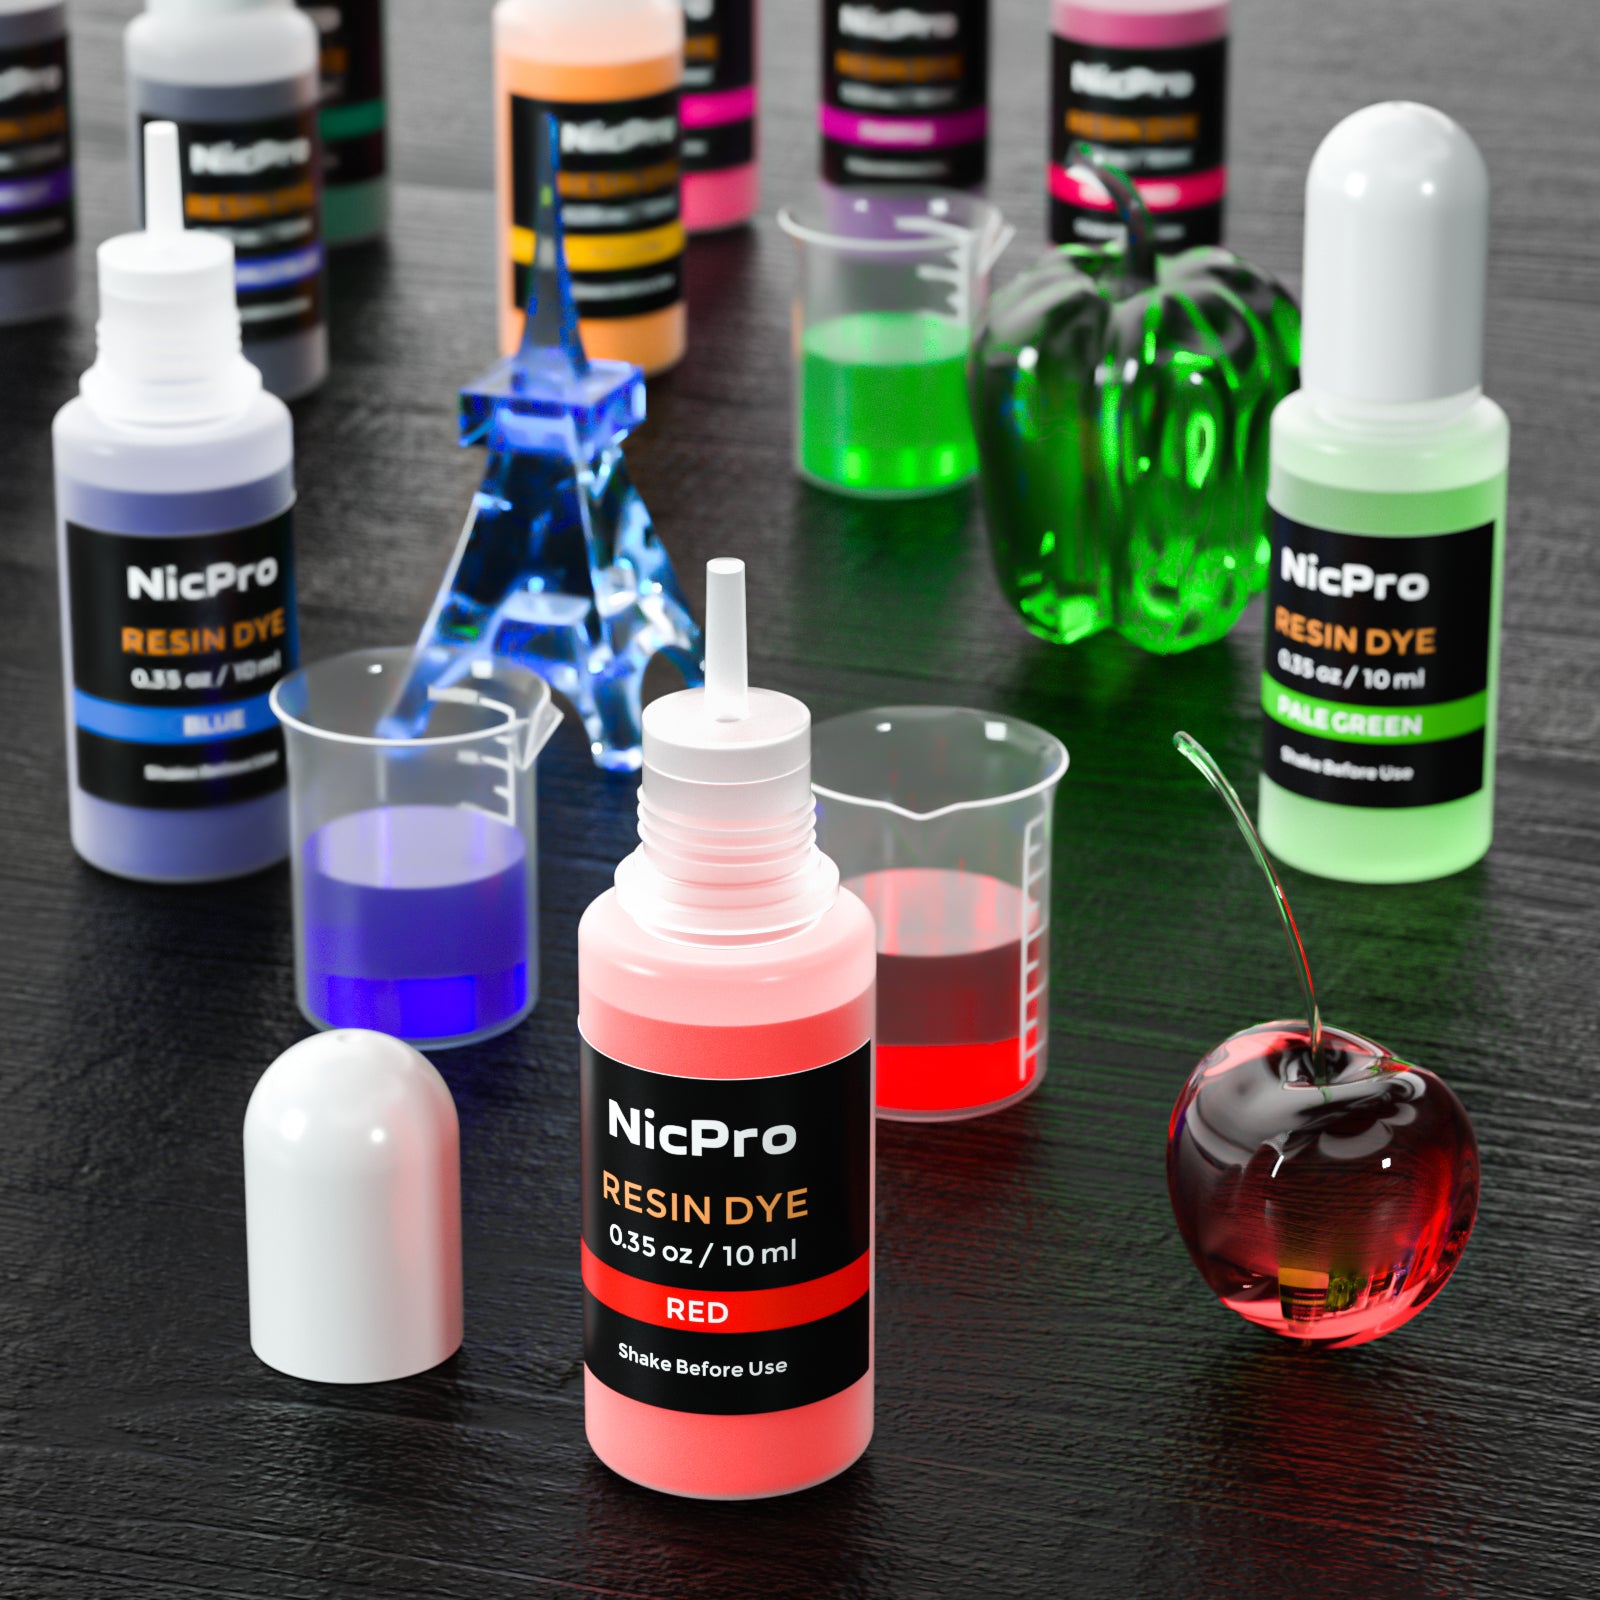 Nicpro 15 Colors Epoxy Resin Pigment, Liquid Epoxy Dye Translucent Resin Tint Colorant for Resin, DIY Jewelry Craft Paint Art Making - 0.35oz Each